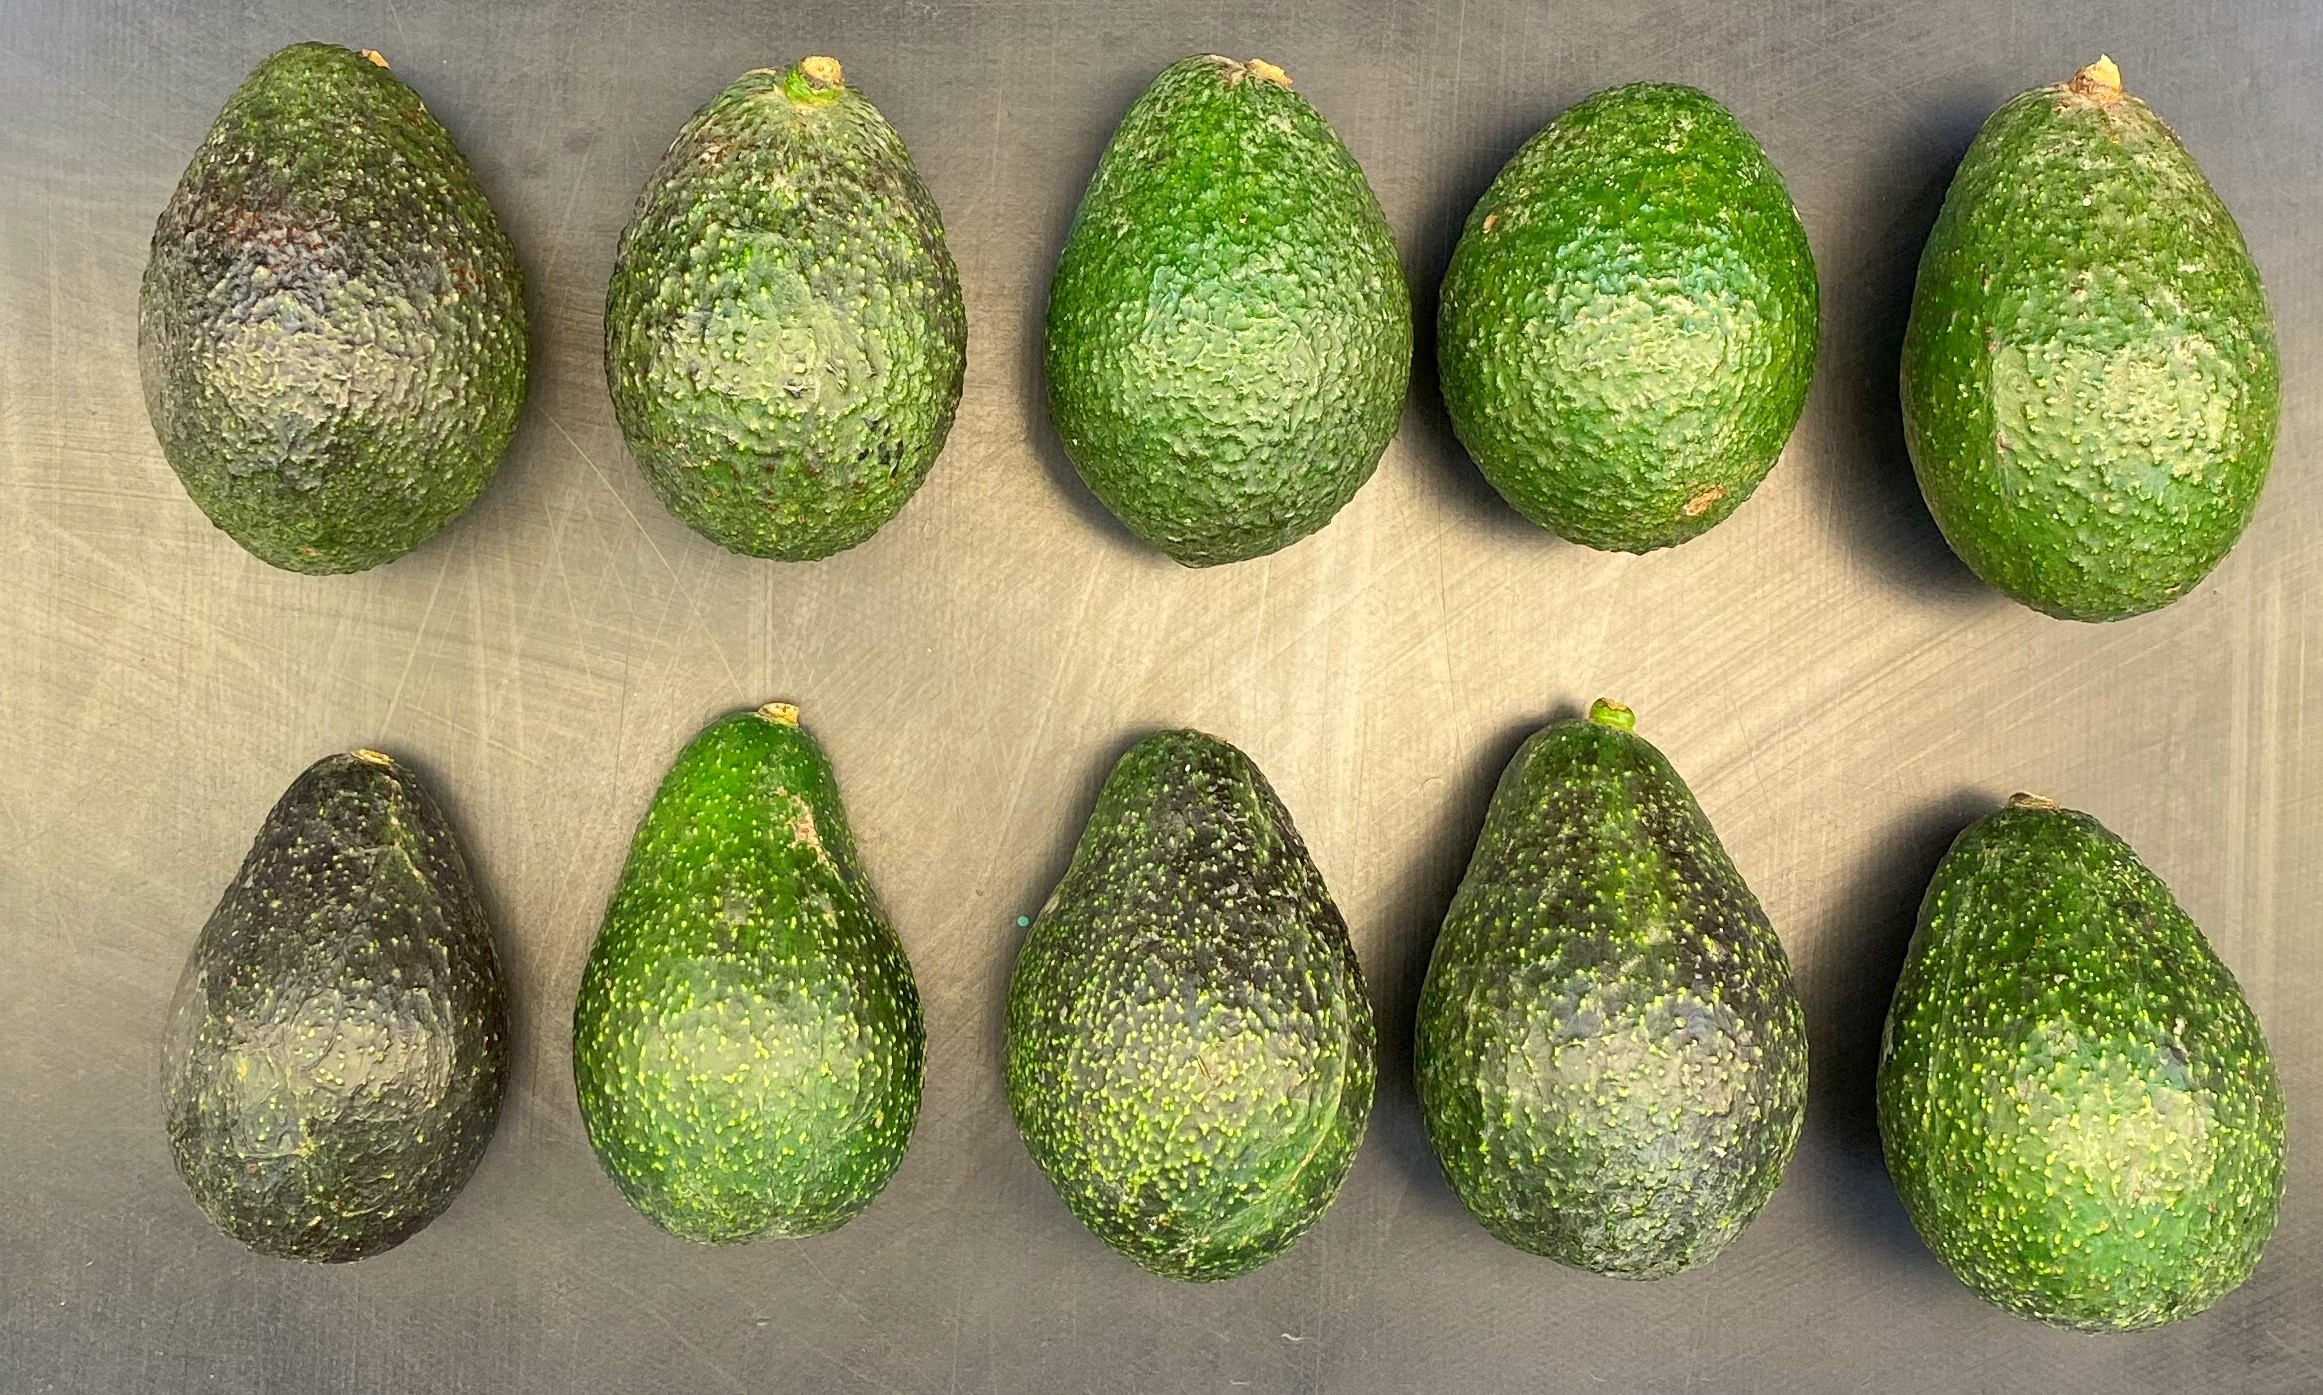 New avocado proves tasty and safer to harvest at UC ANR research and extension centers